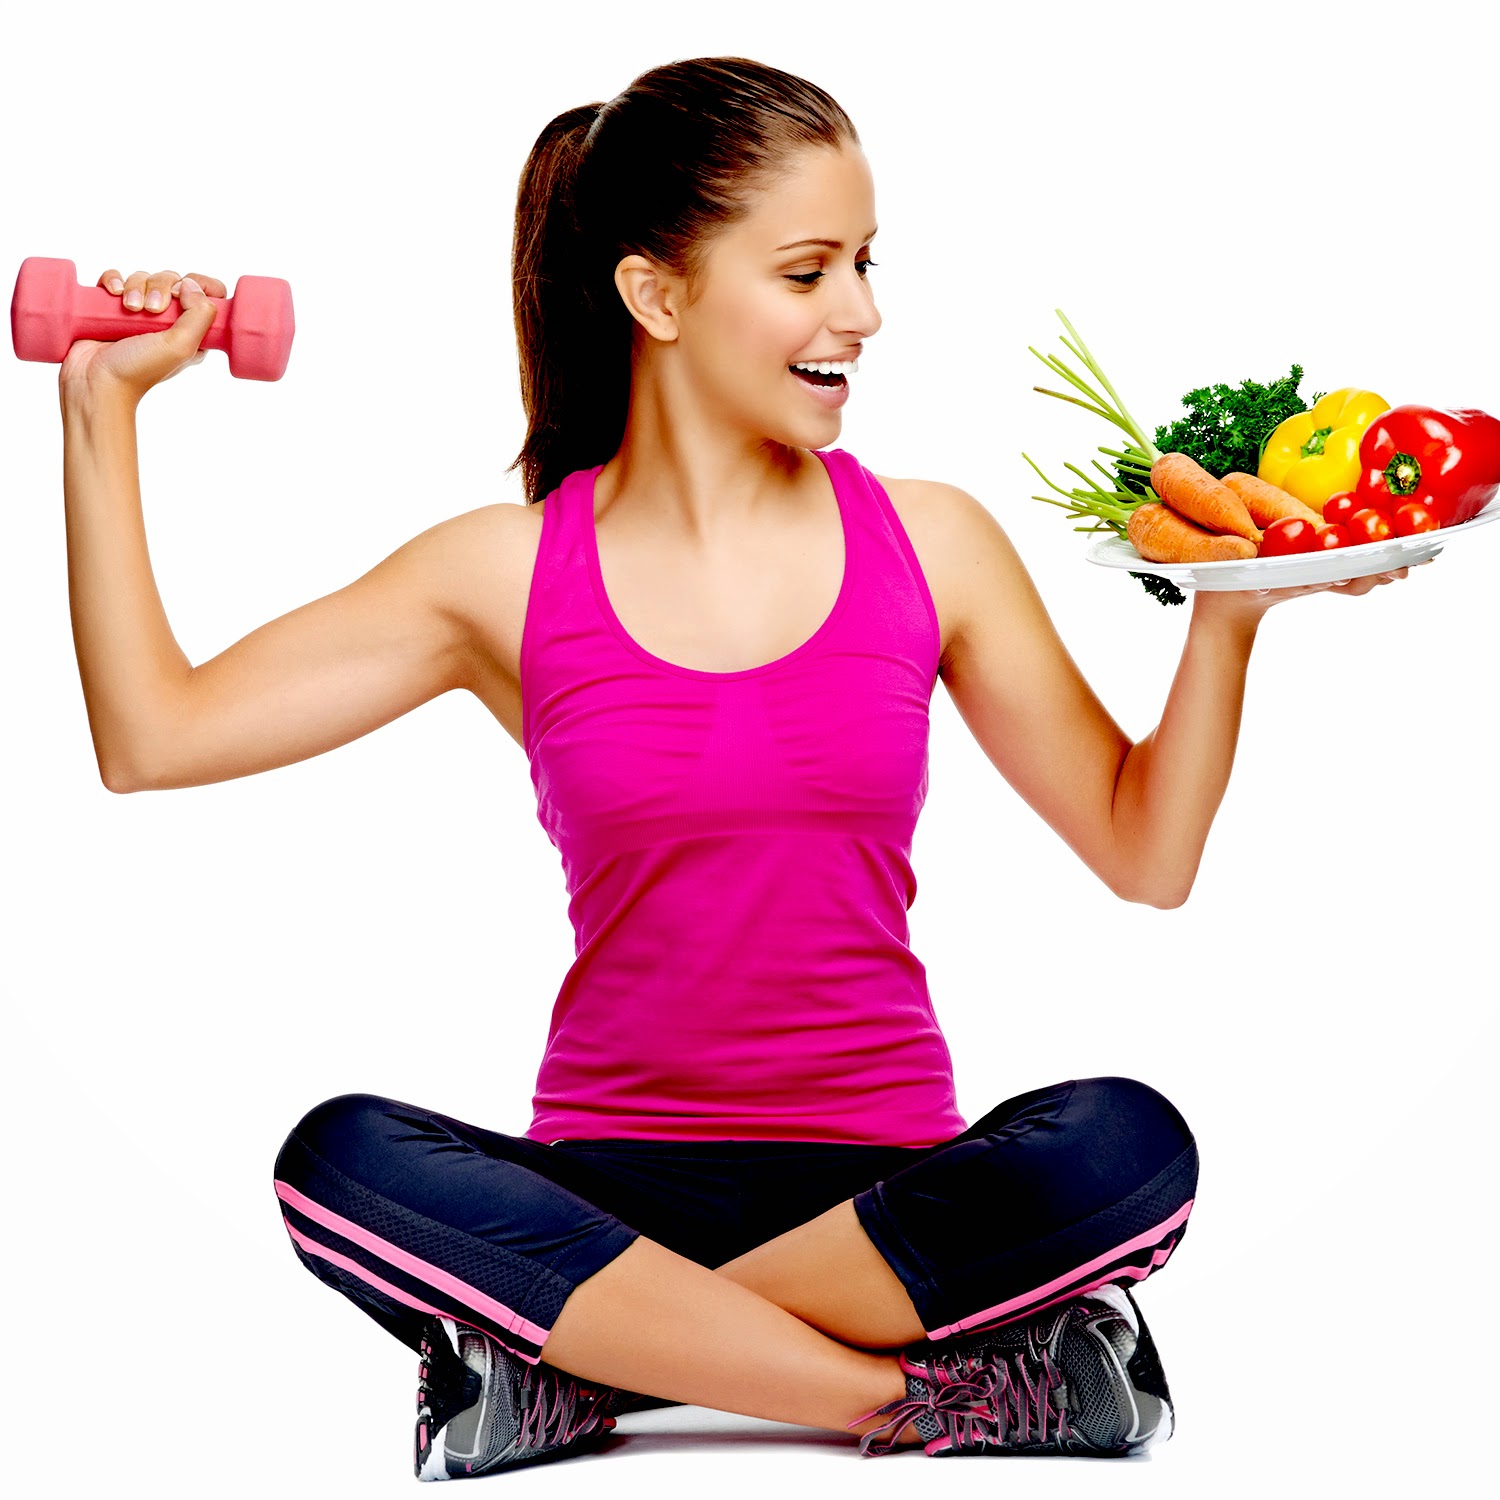 Image result for exercising and dieting